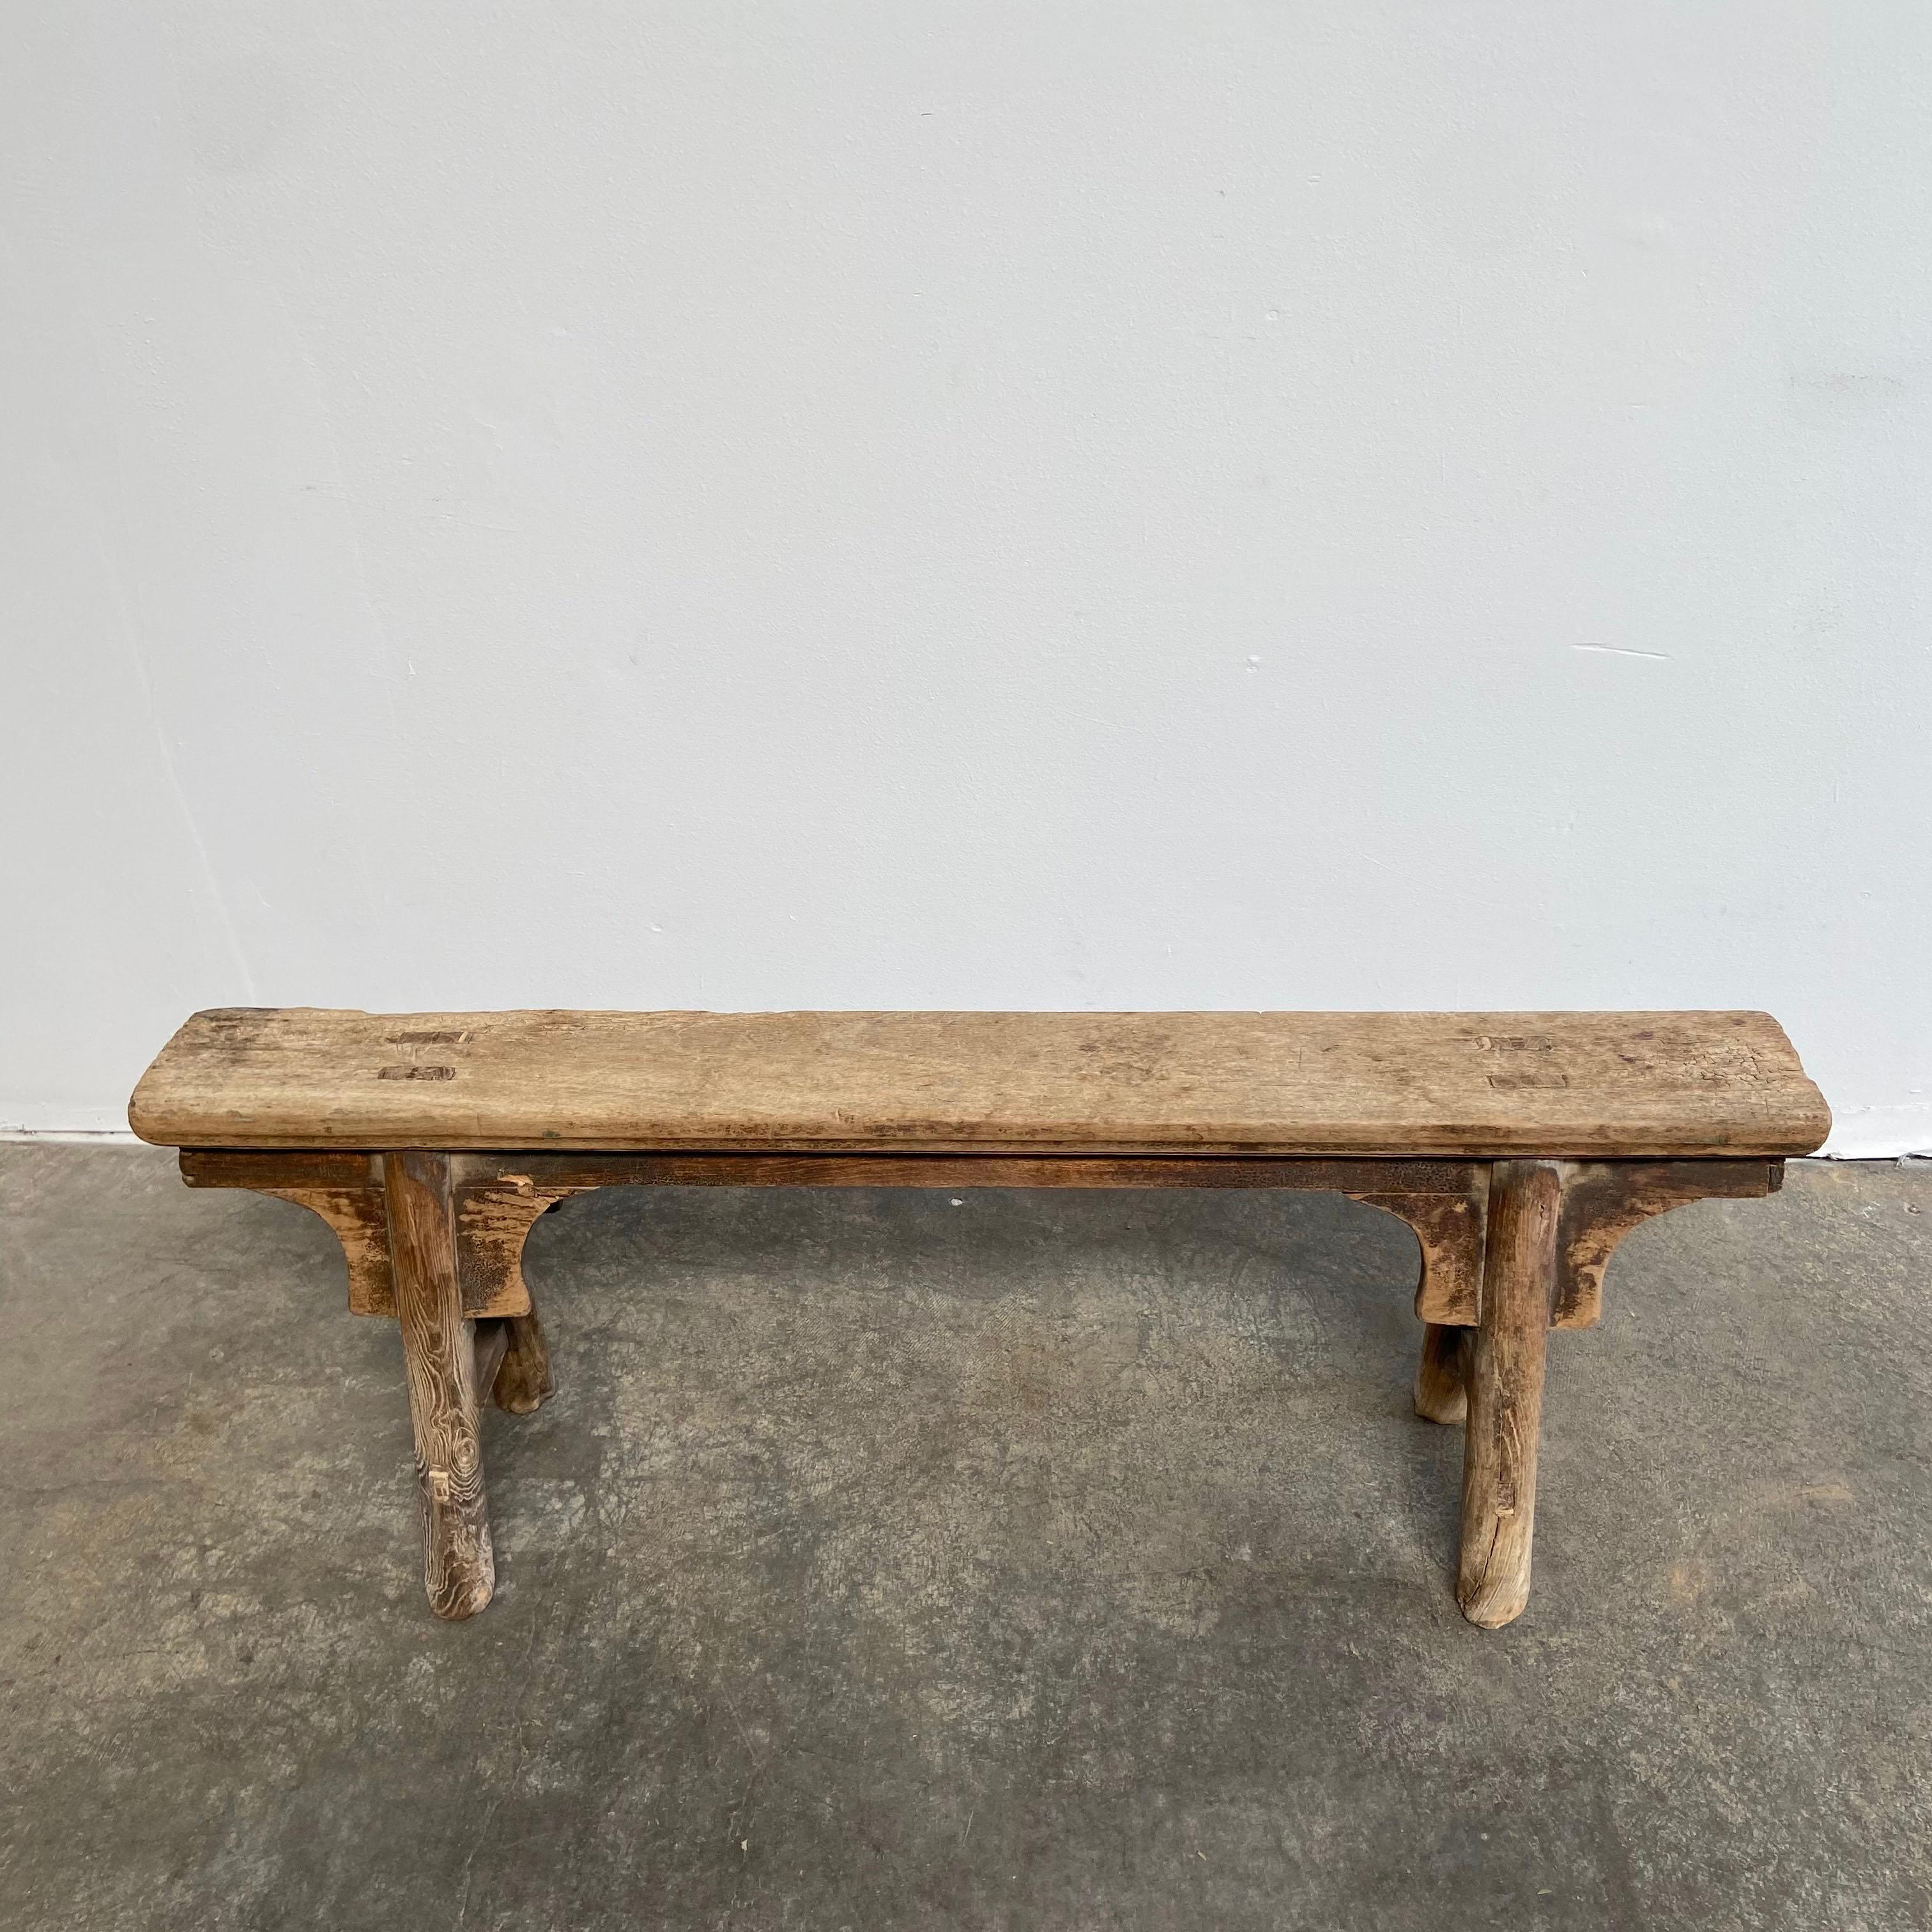 Skinny bench vintage antique elm wood bench
These are the real vintage antique elm wood benches! Beautiful antique patina, with weathering and age, these are solid and sturdy ready for daily use, use as a table behind a sofa, stool, coffee table,